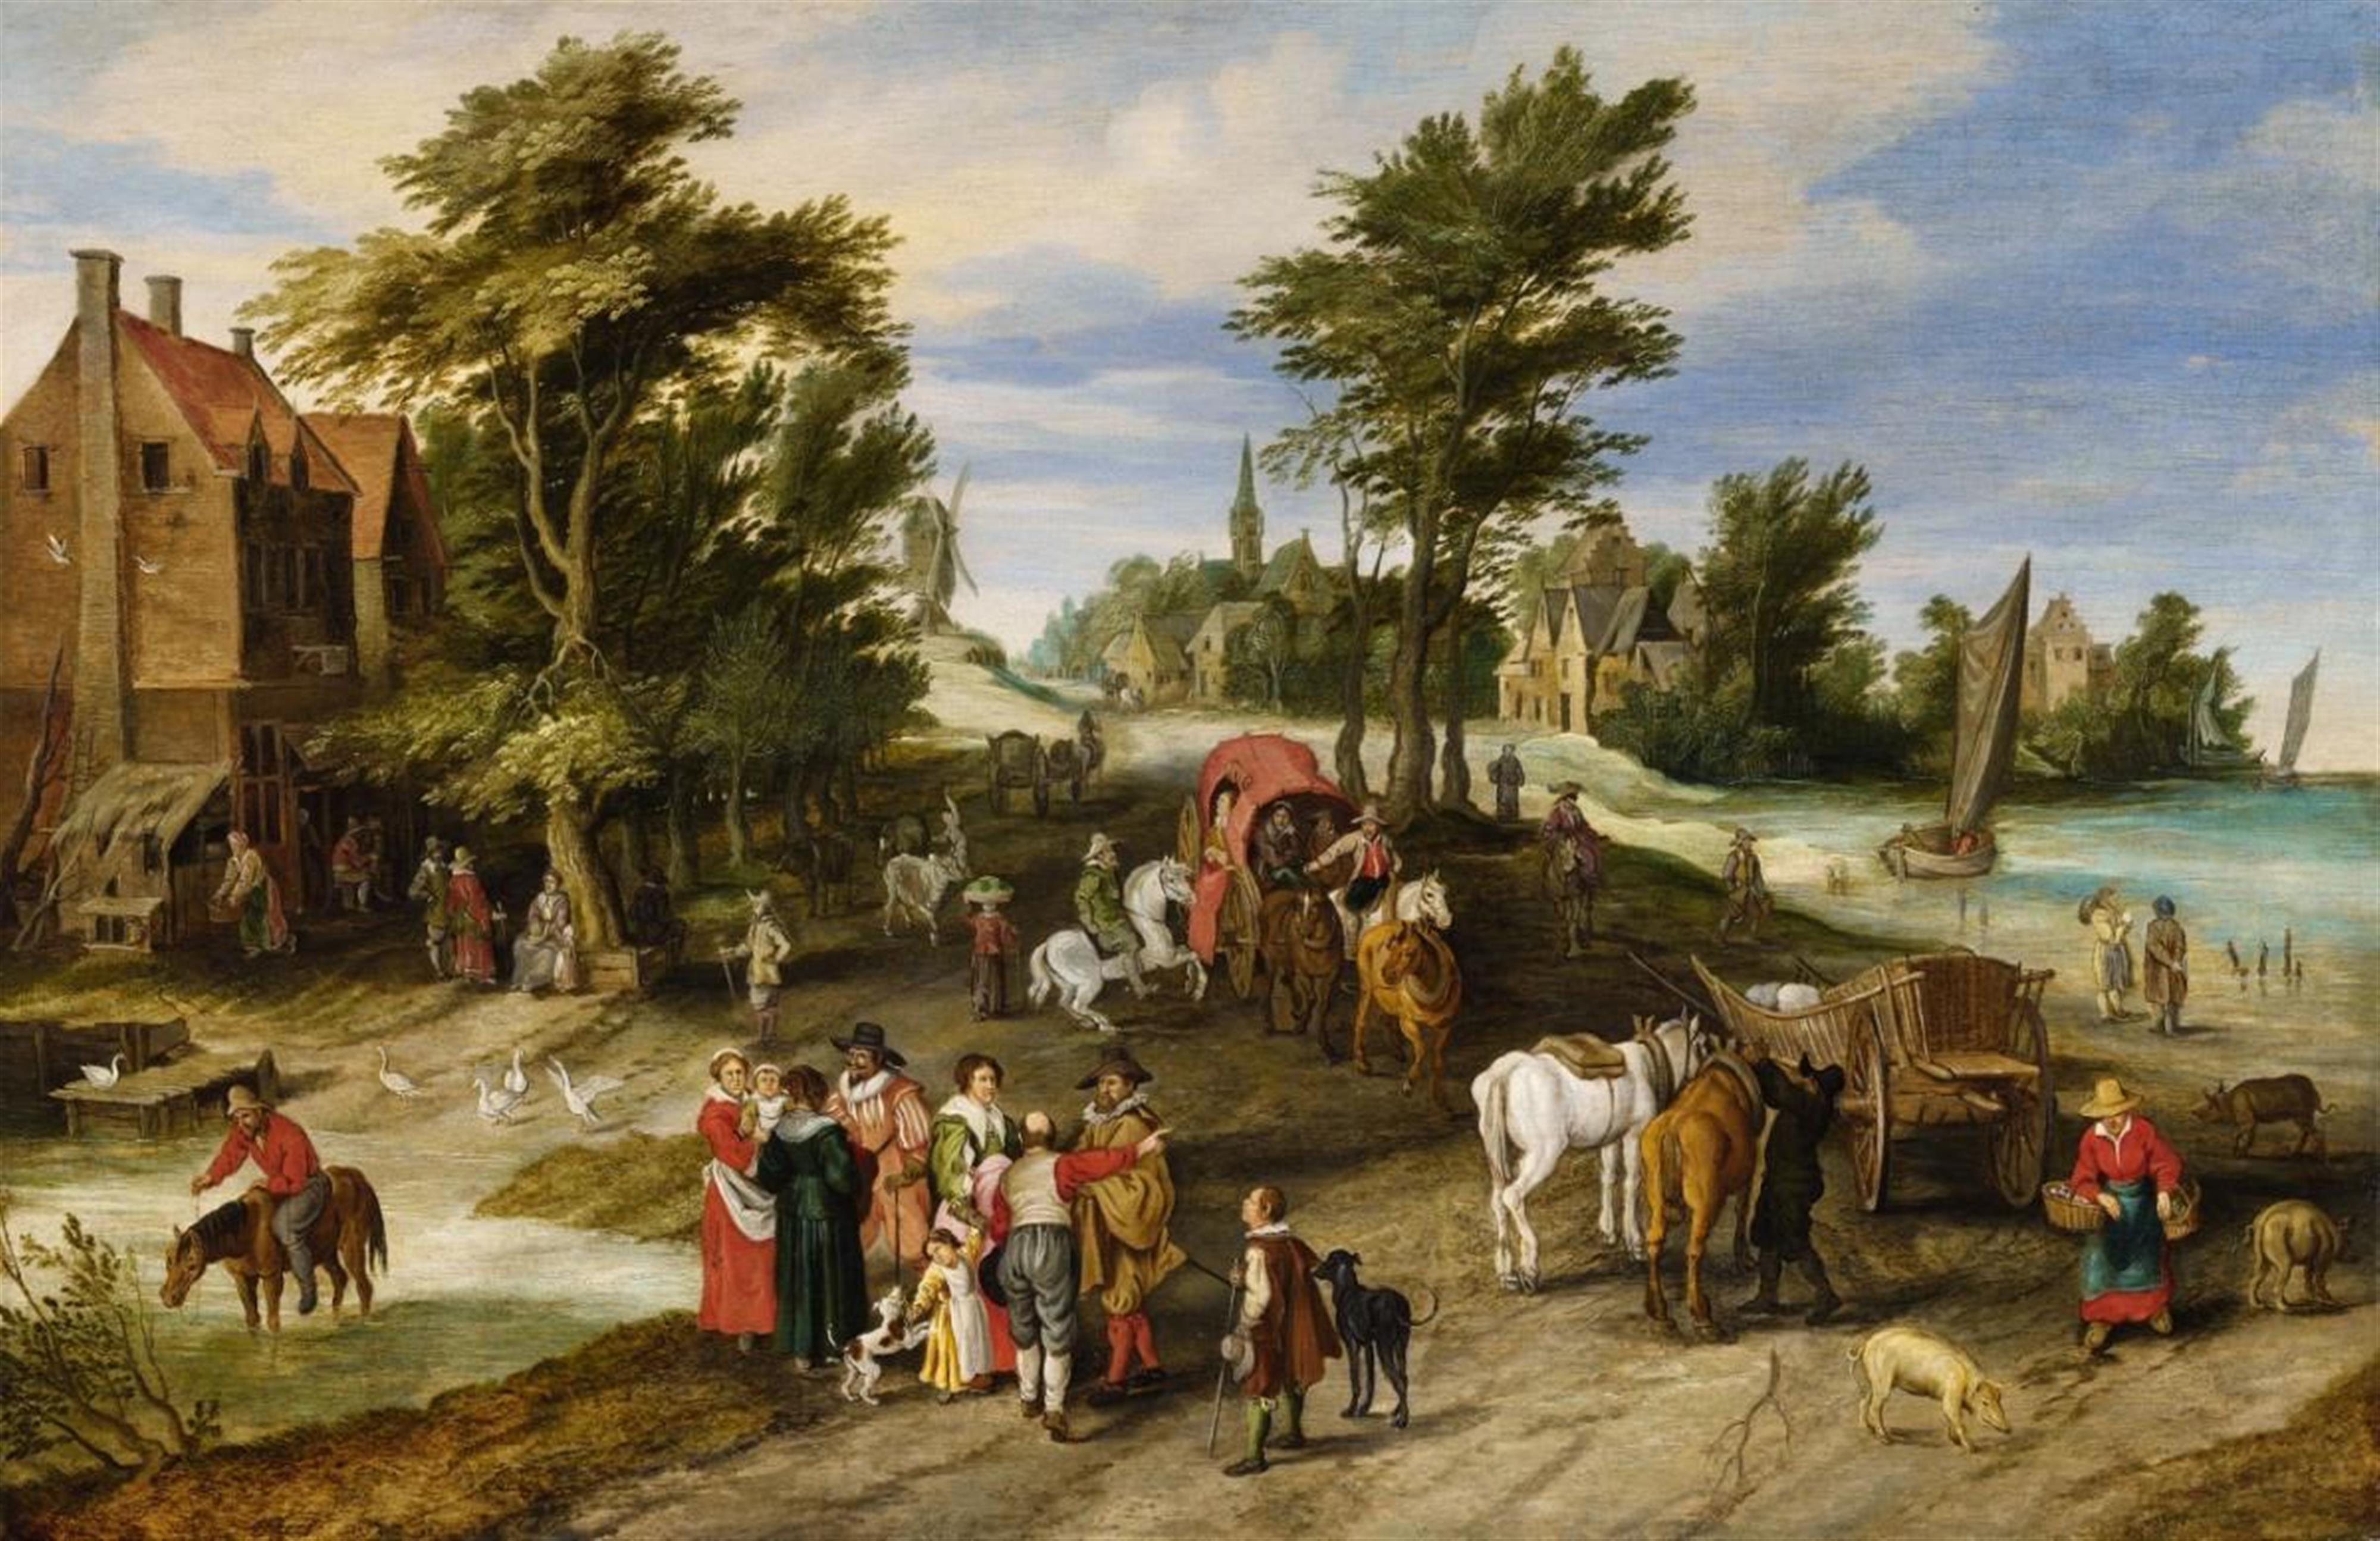 Jan Brueghel the Younger - VILLAGE LANDSCAPE WITH HORSE WATERING PLACE - image-1